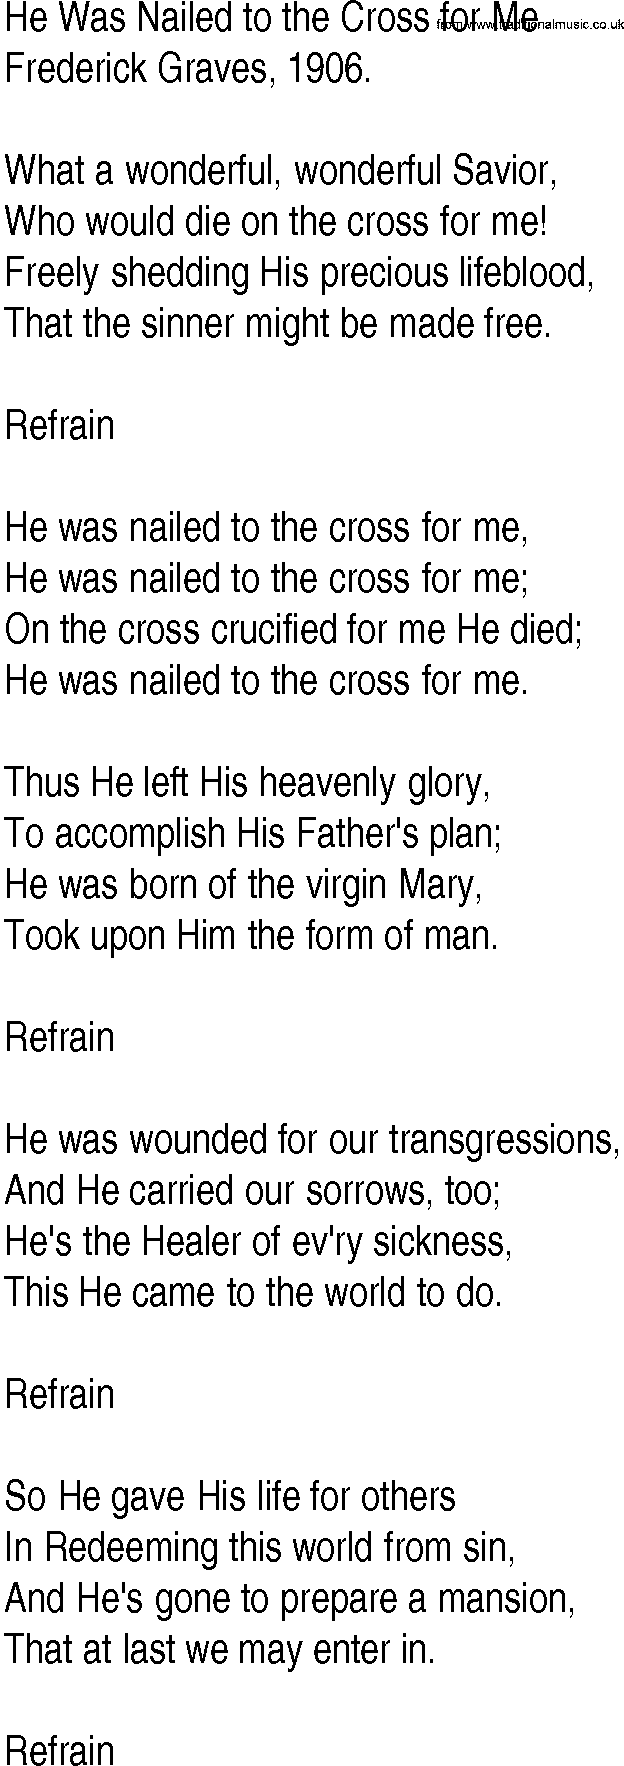 Hymn and Gospel Song: He Was Nailed to the Cross for Me by Frederick Graves lyrics